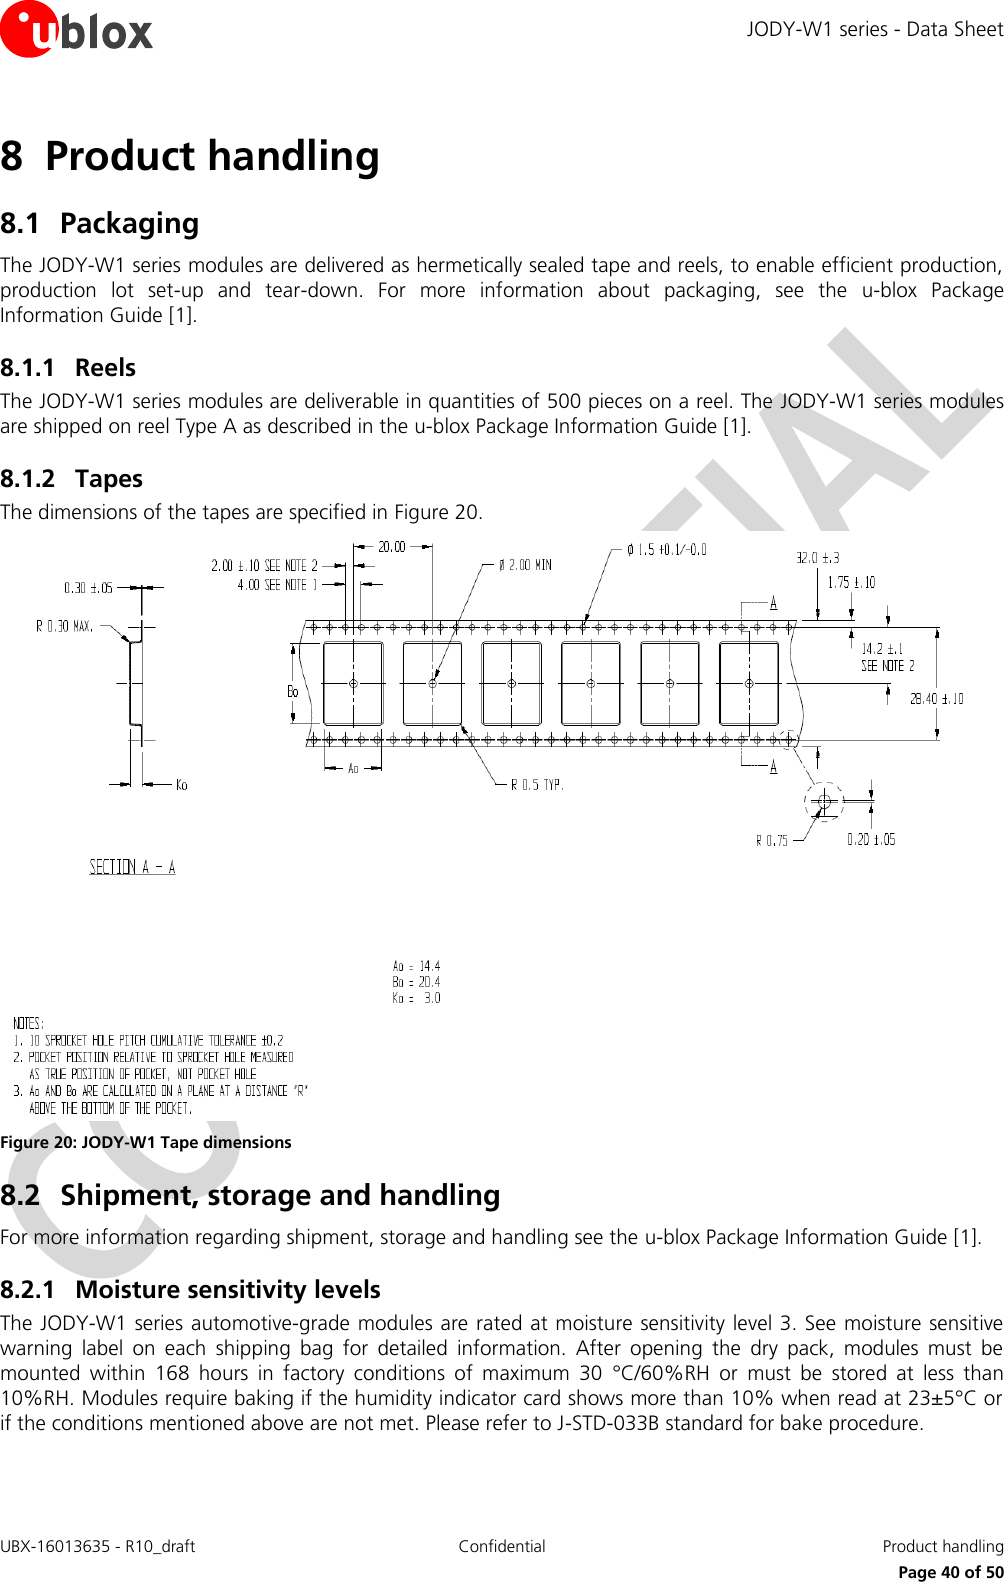 JODY-W1 series - Data Sheet UBX-16013635 - R10_draft Confidential  Product handling     Page 40 of 50 8 Product handling 8.1 Packaging The JODY-W1 series modules are delivered as hermetically sealed tape and reels, to enable efficient production, production  lot  set-up  and  tear-down.  For  more  information  about  packaging,  see  the  u-blox  Package Information Guide [1]. 8.1.1 Reels The JODY-W1 series modules are deliverable in quantities of 500 pieces on a reel. The JODY-W1 series modules are shipped on reel Type A as described in the u-blox Package Information Guide [1]. 8.1.2 Tapes The dimensions of the tapes are specified in Figure 20.   Figure 20: JODY-W1 Tape dimensions 8.2 Shipment, storage and handling For more information regarding shipment, storage and handling see the u-blox Package Information Guide [1]. 8.2.1 Moisture sensitivity levels  The JODY-W1 series automotive-grade modules are rated at moisture sensitivity level 3. See moisture sensitive warning  label  on  each  shipping  bag  for  detailed  information.  After  opening  the  dry  pack,  modules  must  be mounted  within  168  hours  in  factory  conditions  of  maximum  30  °C/60%RH  or  must  be  stored  at  less  than 10%RH. Modules require baking if the humidity indicator card shows more than 10% when read at 23±5°C or if the conditions mentioned above are not met. Please refer to J-STD-033B standard for bake procedure.  